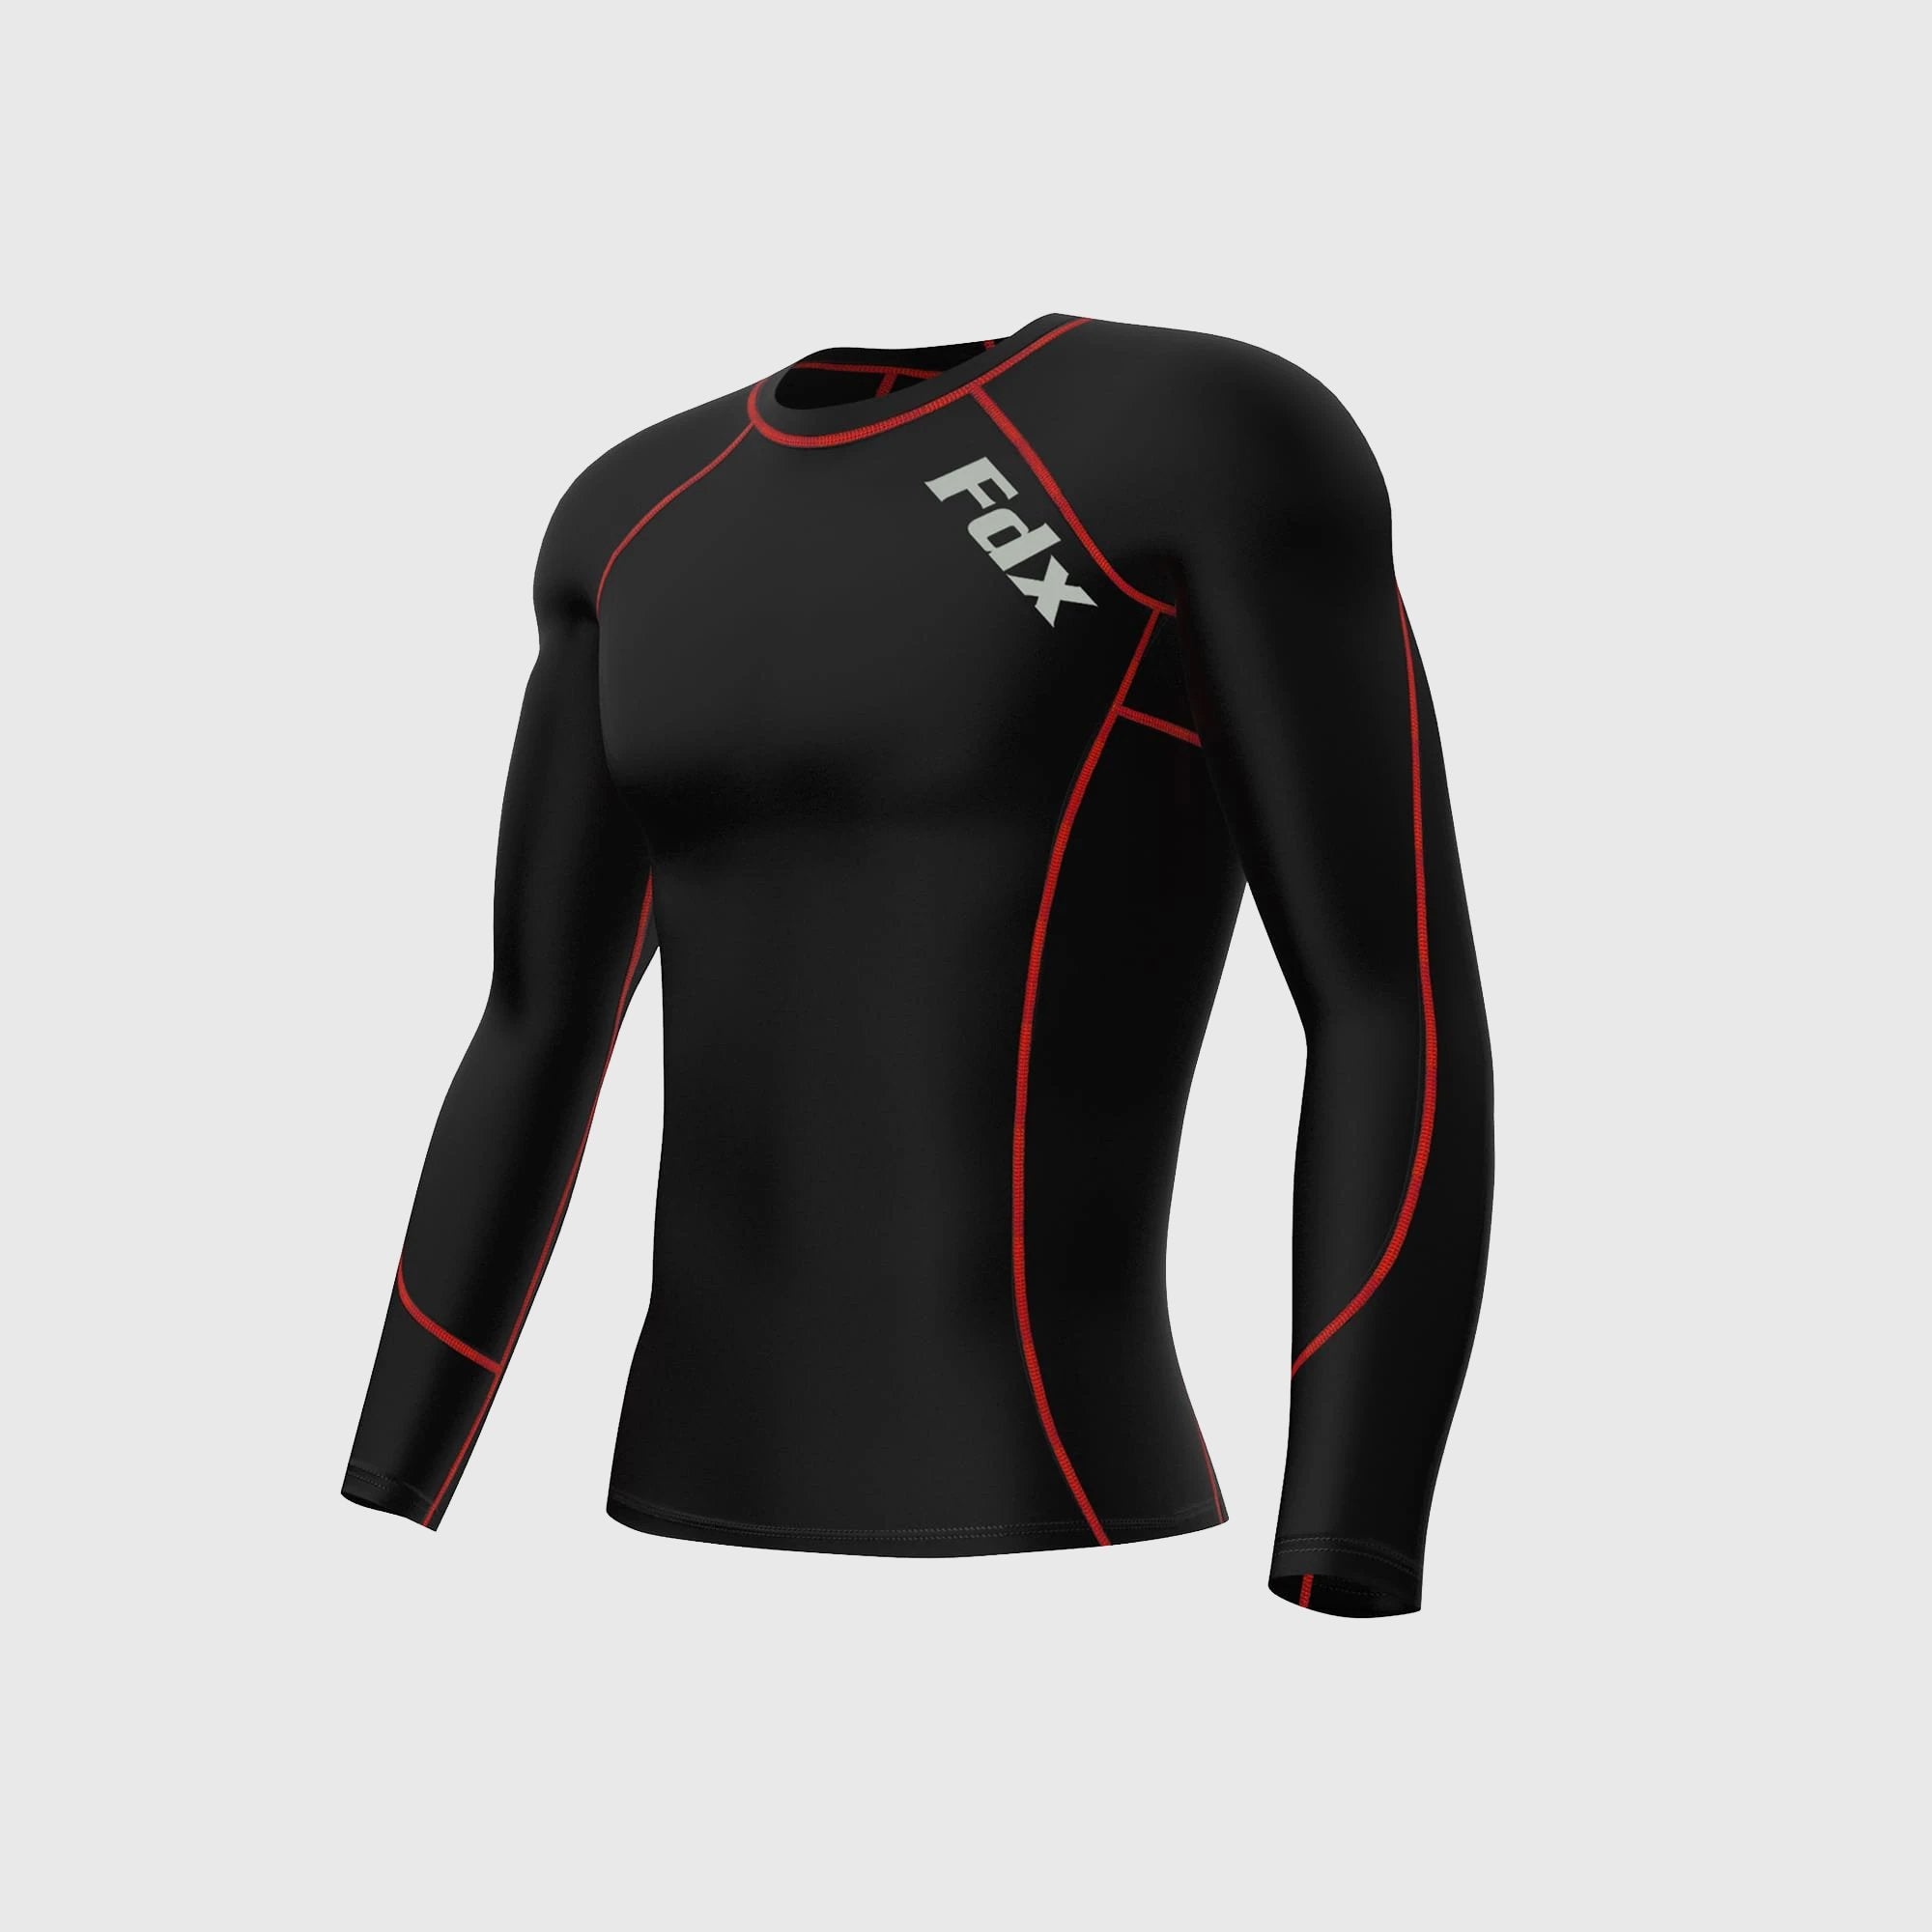 Fdx Thermolinx Red Men's Base Layer Thermal Winter Compression Top